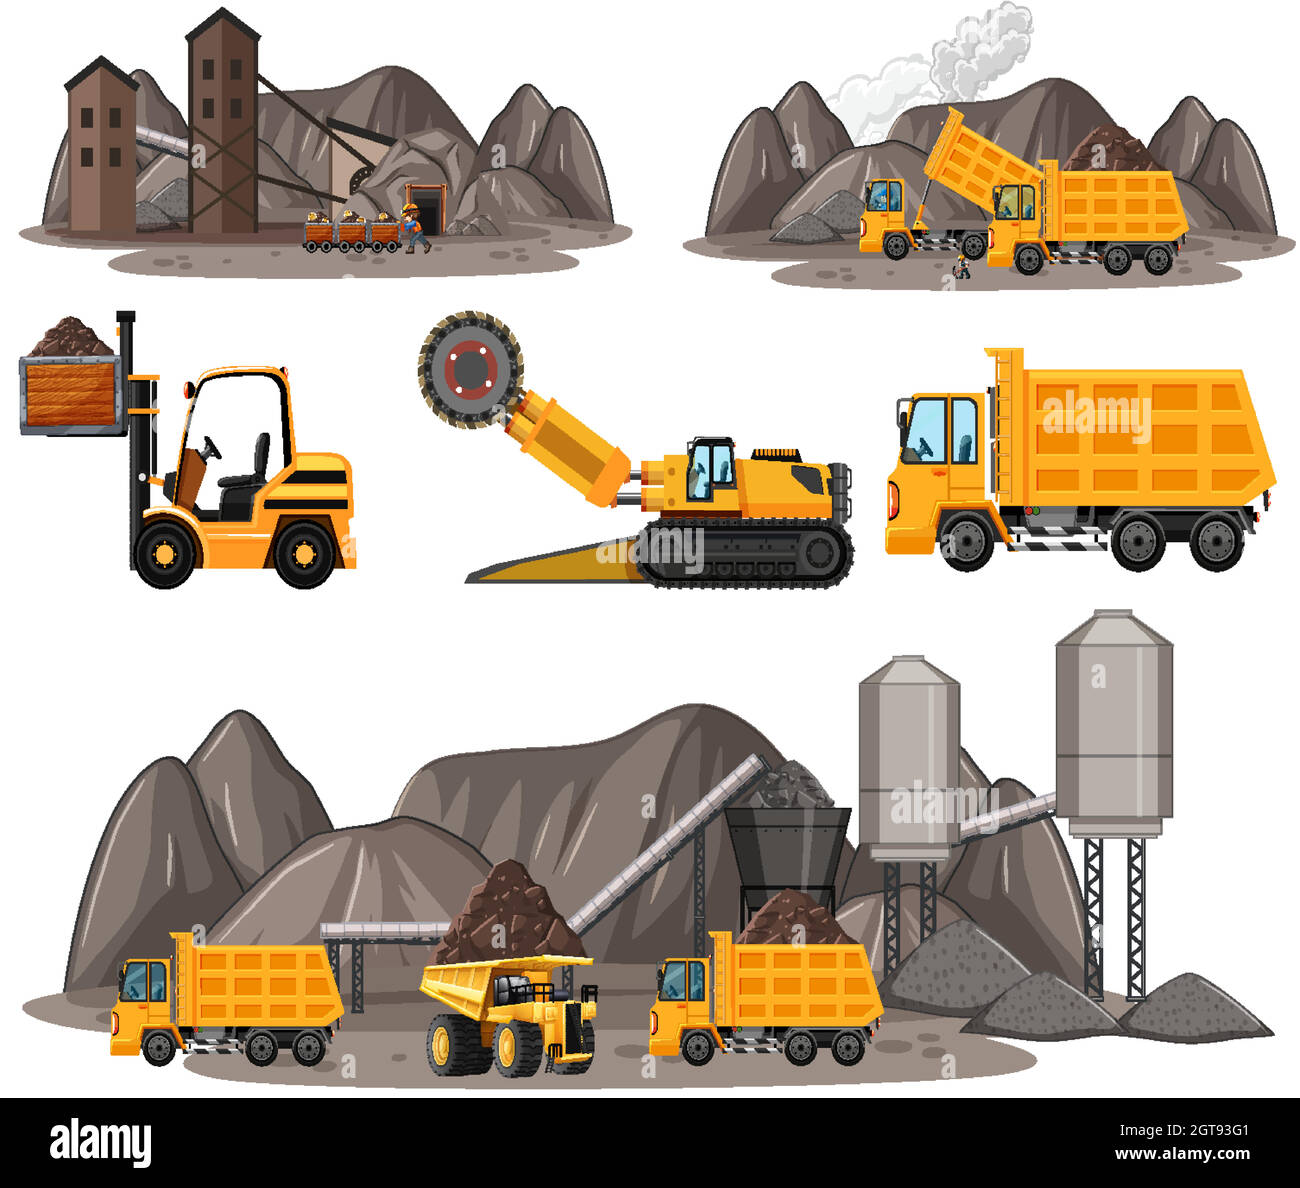 Coal mining scene with different types of construction trucks Stock Vector